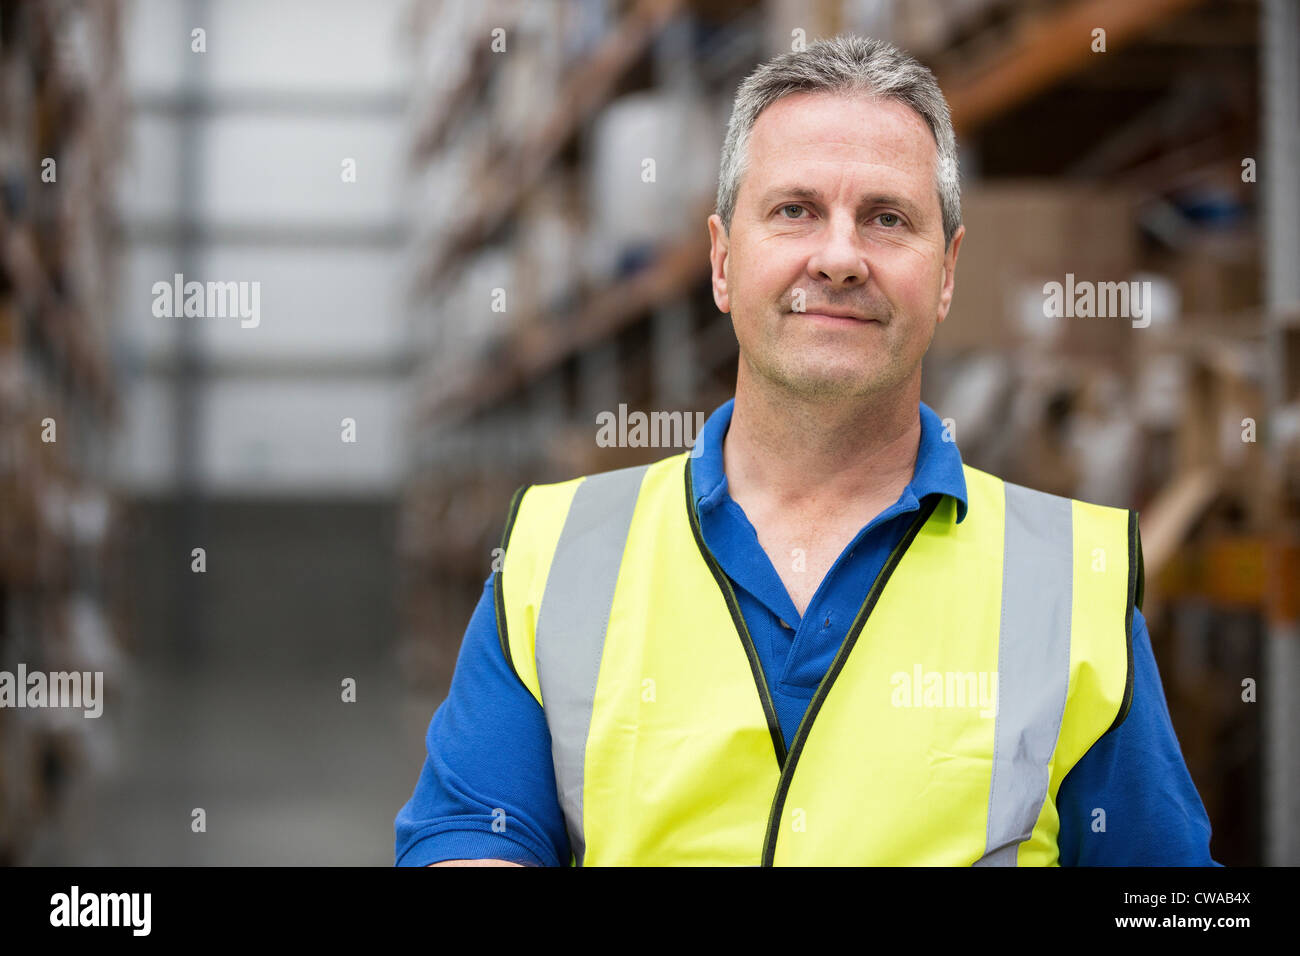 Man wearing high visibility clothing in warehouse, portrait Stock Photo